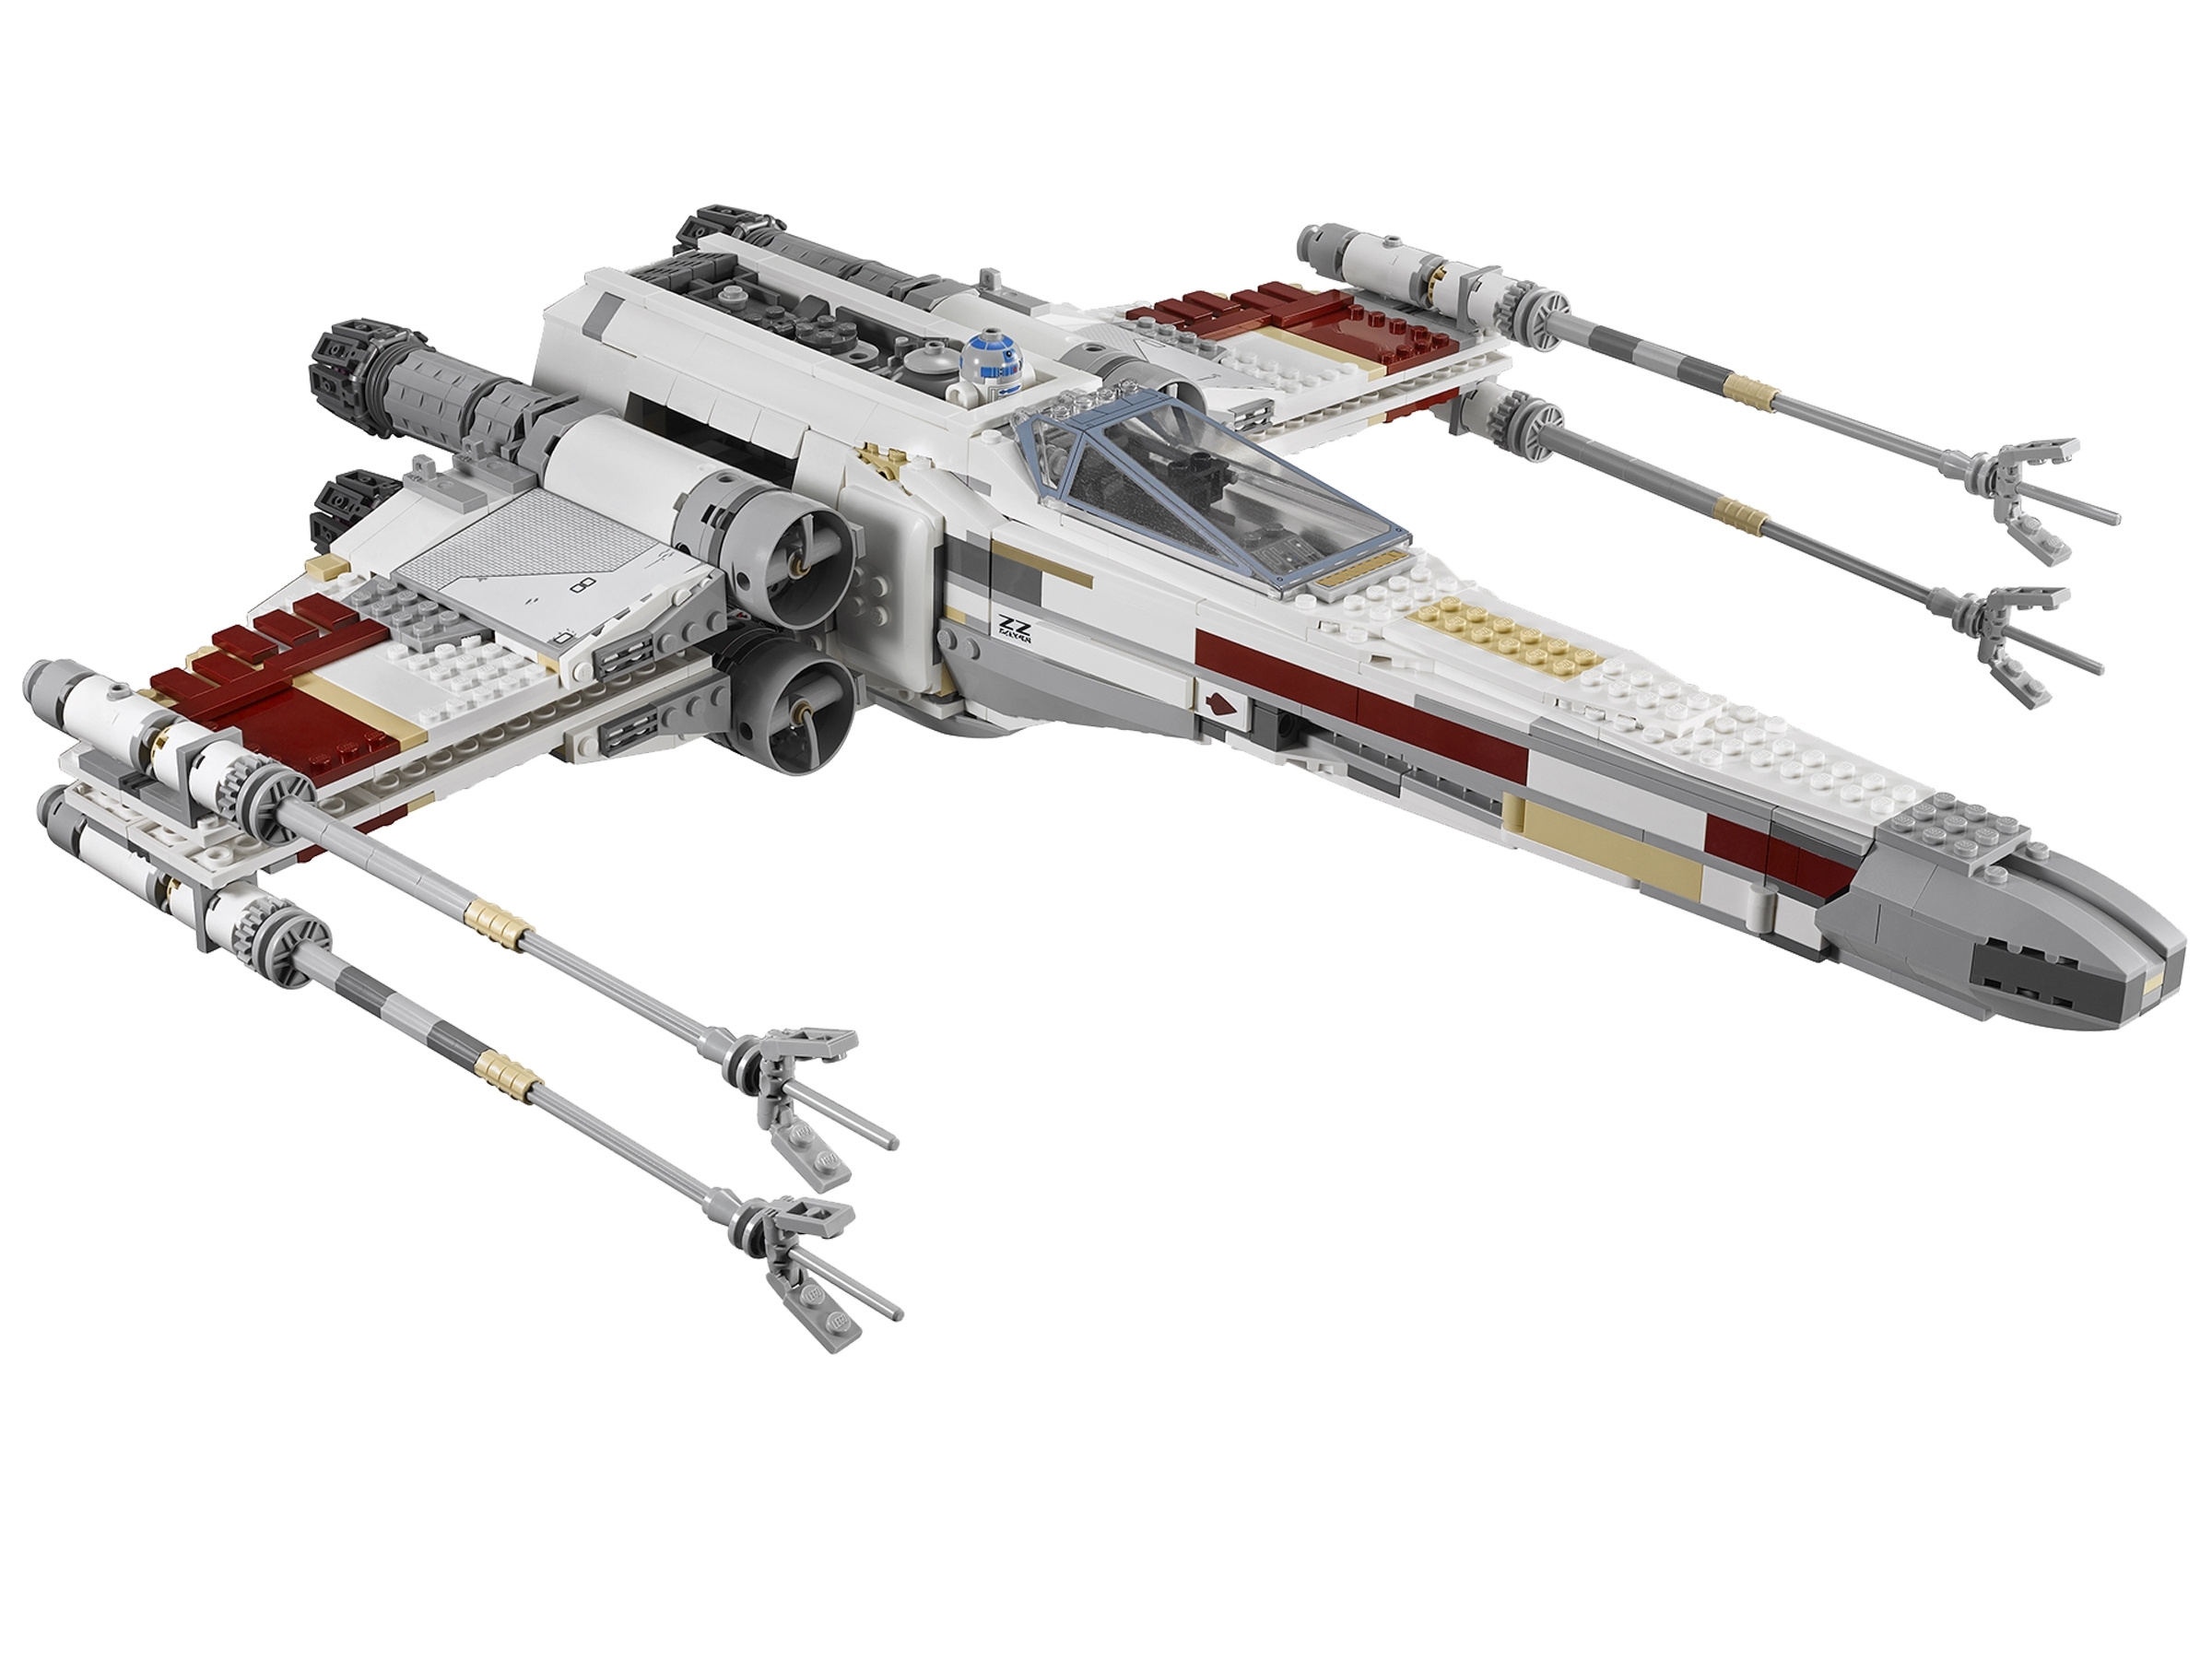 Details about   Custom Decal/Stickers for Lego ® Starwars 10240 Red Five X-Wing Starfighter ker passend für LEGO® 10240 Red Five X-wing Starfighter  data-mtsrclang=en-US href=# onclick=return false; 							show original title 